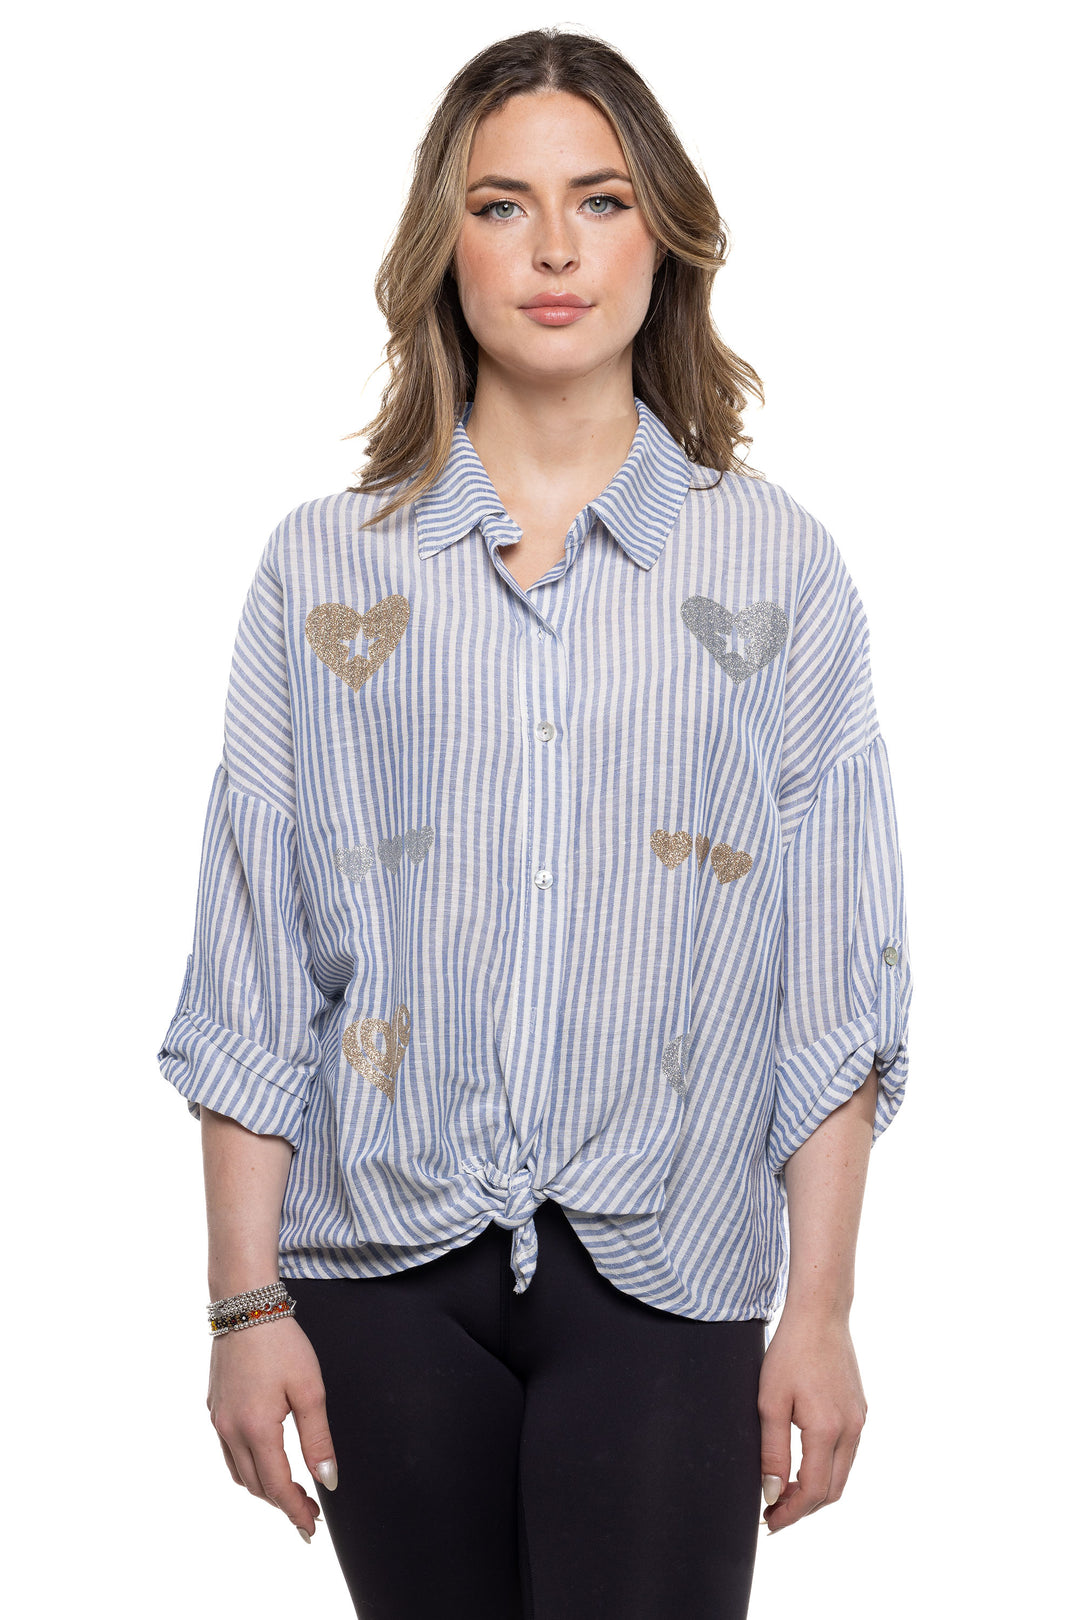 Etern Elle Summer 2024 This shirt features a unique glitter silver &amp; gold hearts design print that will add a touch of glamour to any outfit.